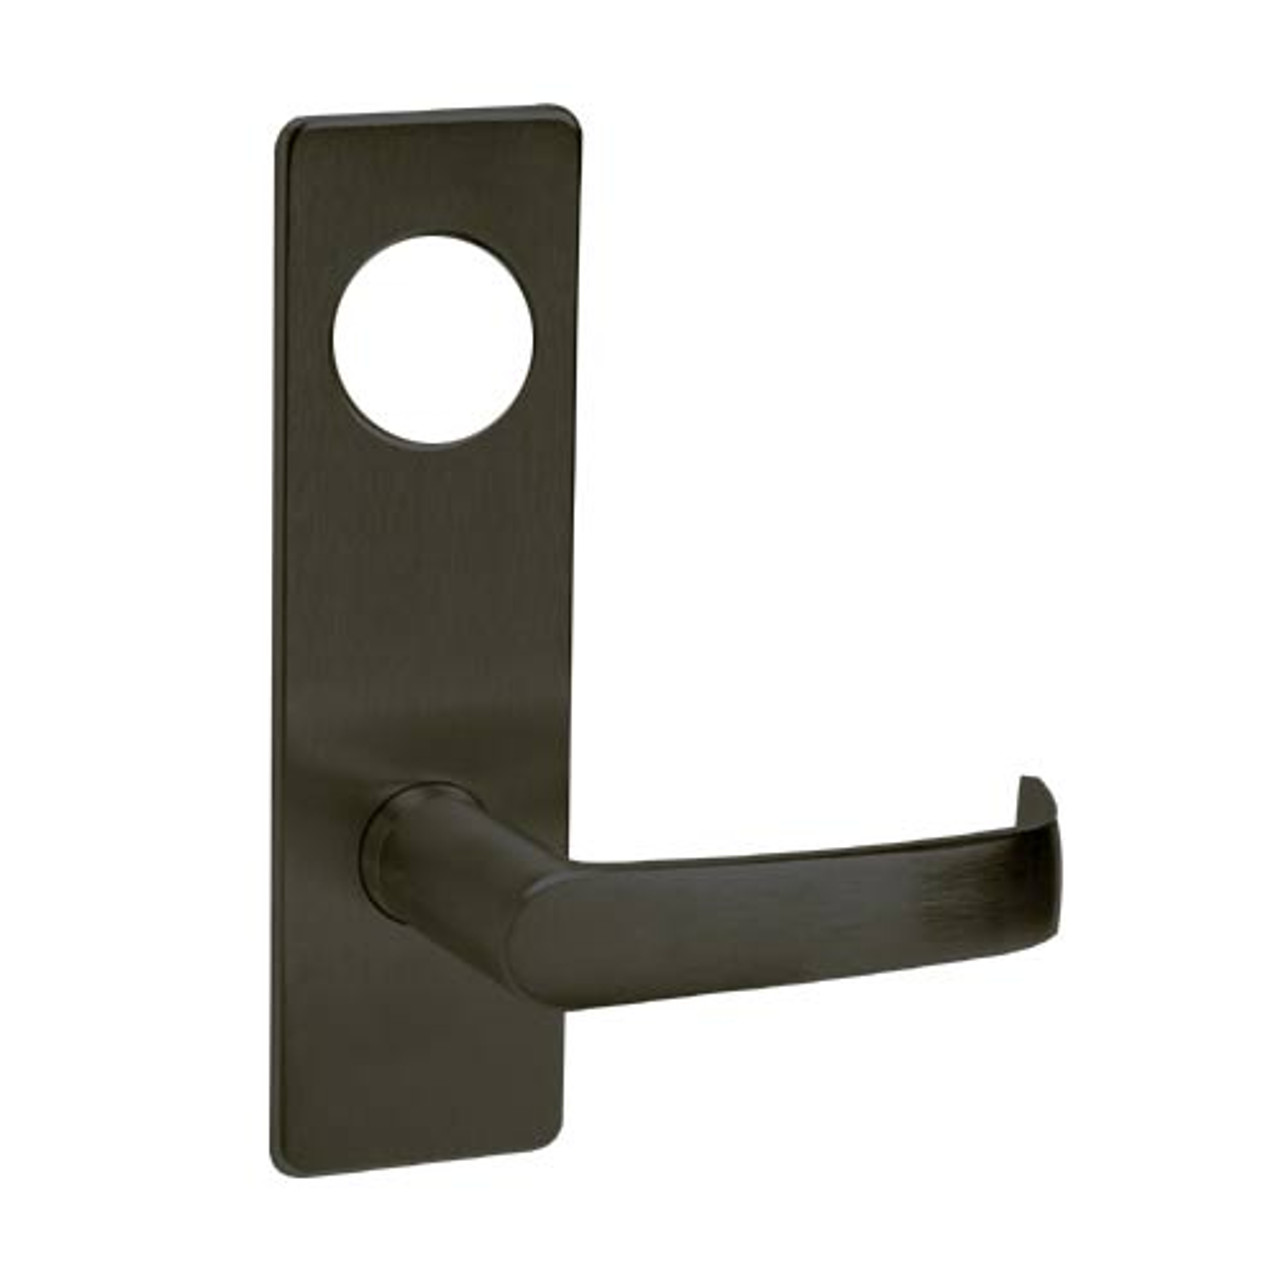 ML2069-NSR-613-LC Corbin Russwin ML2000 Series Mortise Institution Privacy Locksets with Newport Lever in Oil Rubbed Bronze